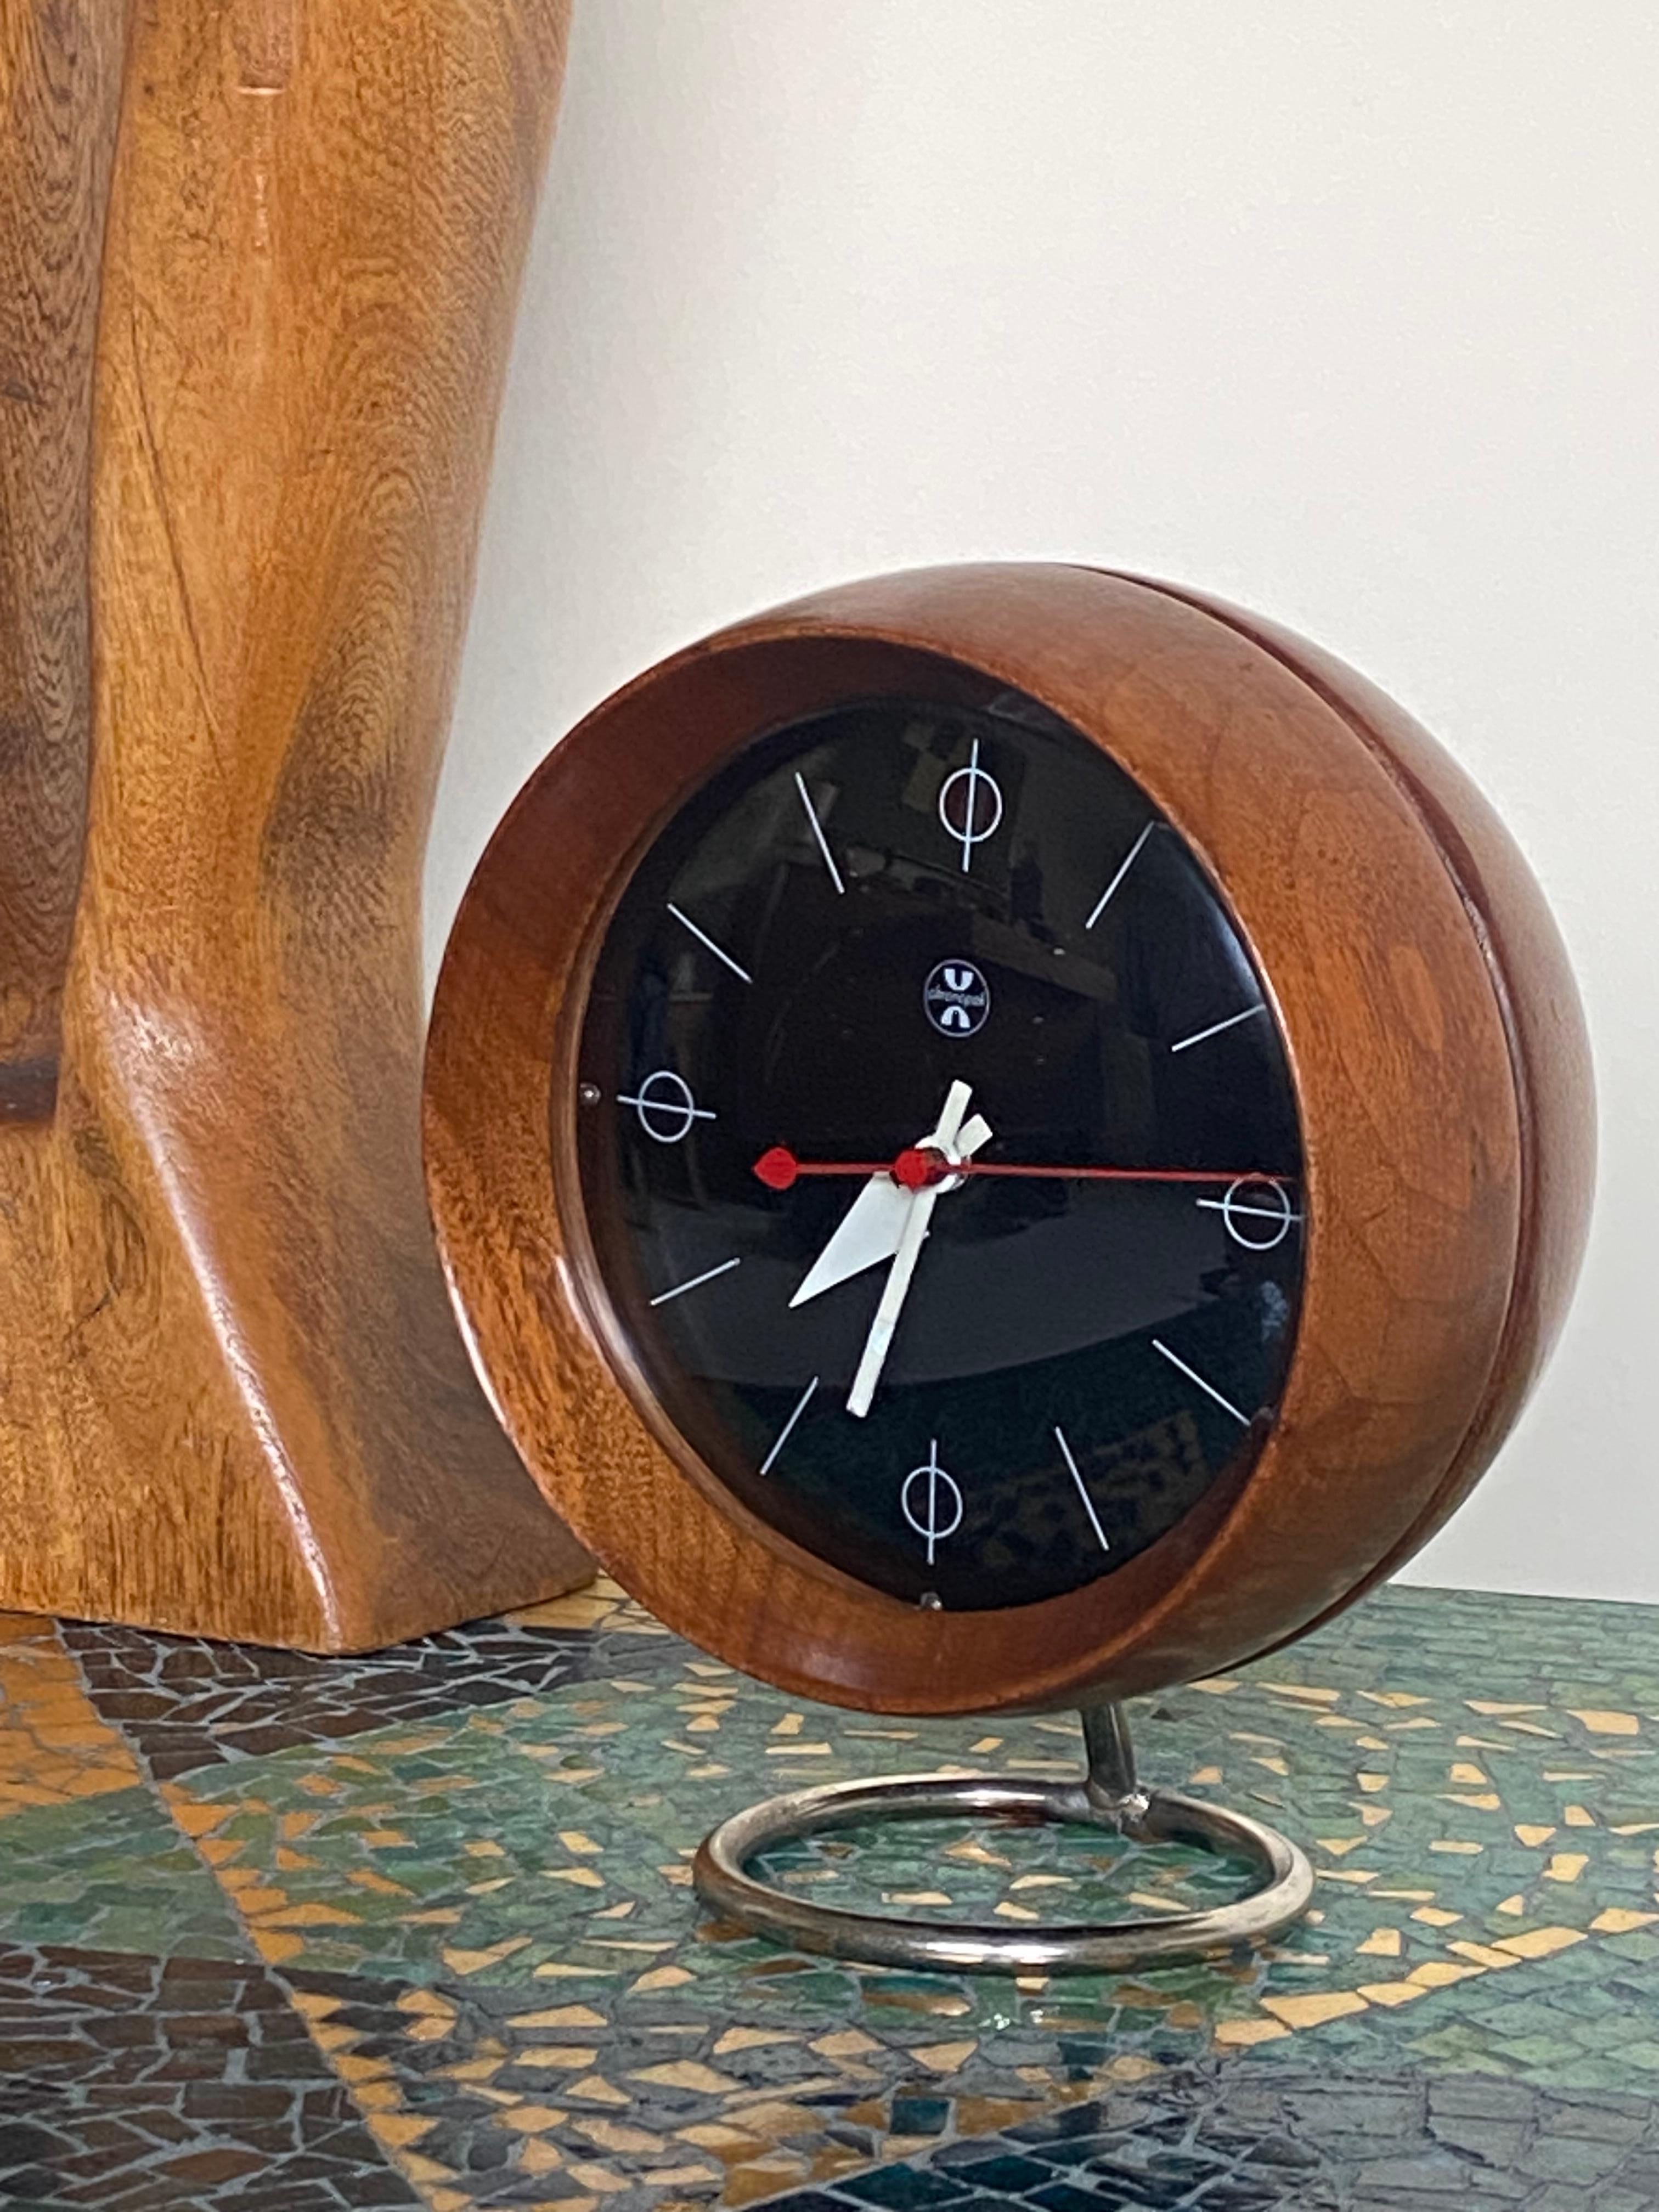 One of the earlier designs for the Howard Miller clock company is this walnut table clock model 4765 circa 1949 designed by Irving Harper for George Nelson & Associates and the Howard Miller Company. Globe shaped body in walnut with a glass front